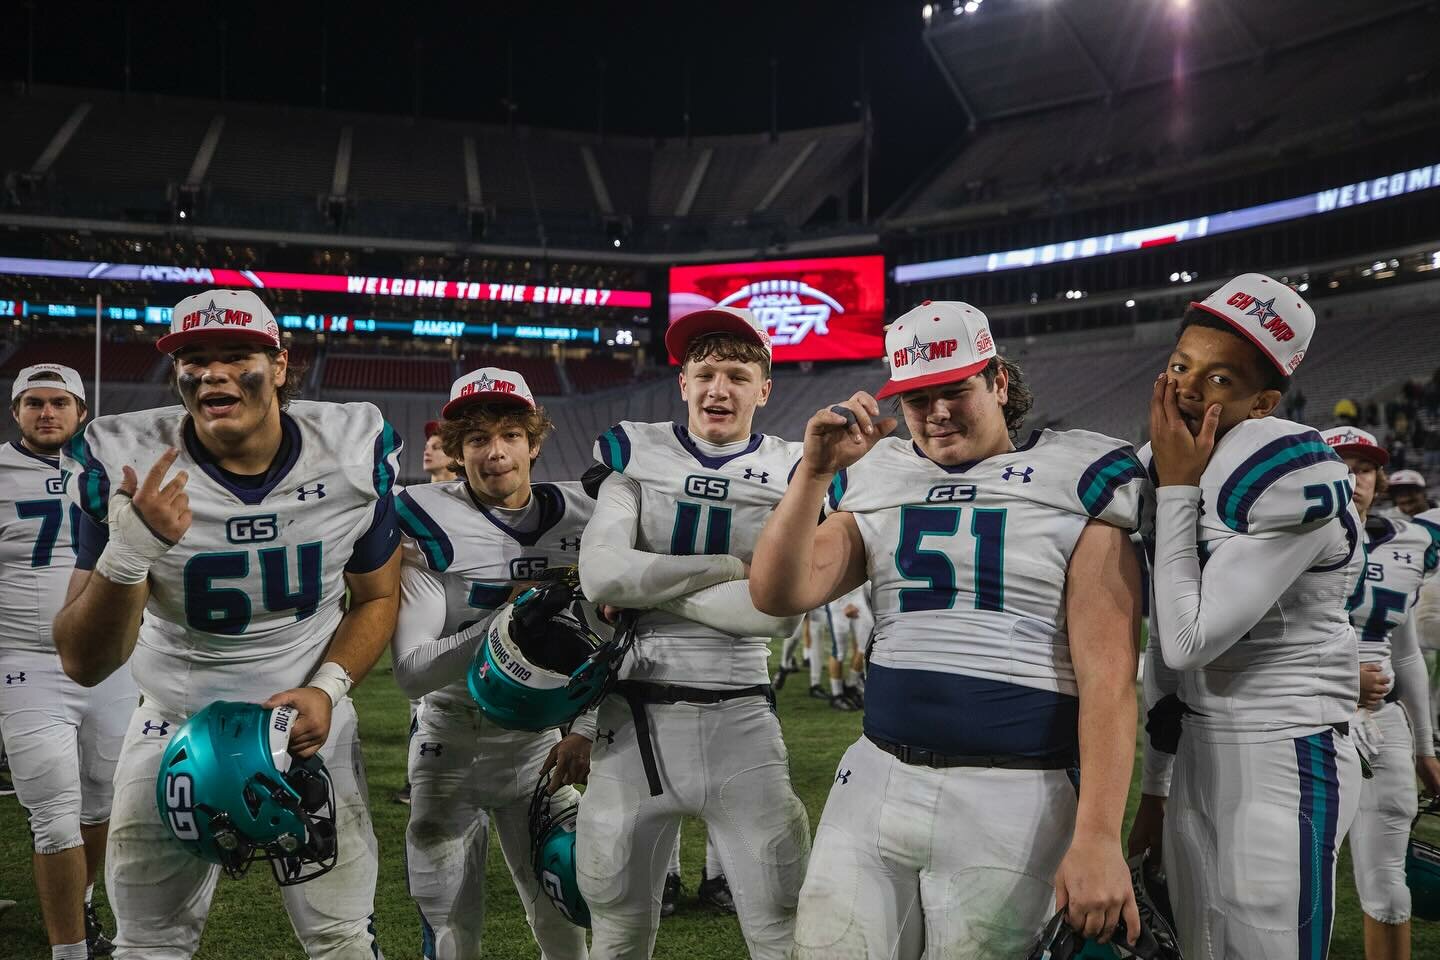 Dolphin football players including Sam Schepker (64), Will Langston (27), Carter Byrd (4), Brantley Akins (51) and Jonathan Jackson (24) celebrate the 21-14 win over Ramsay that crowned Gulf Shores as Class 5A state champions at Bryant-Denny Stadium on Thursday, Dec. 7. The 2023 Dolphin team became the first in program history to finish a season undefeated at 15-0.